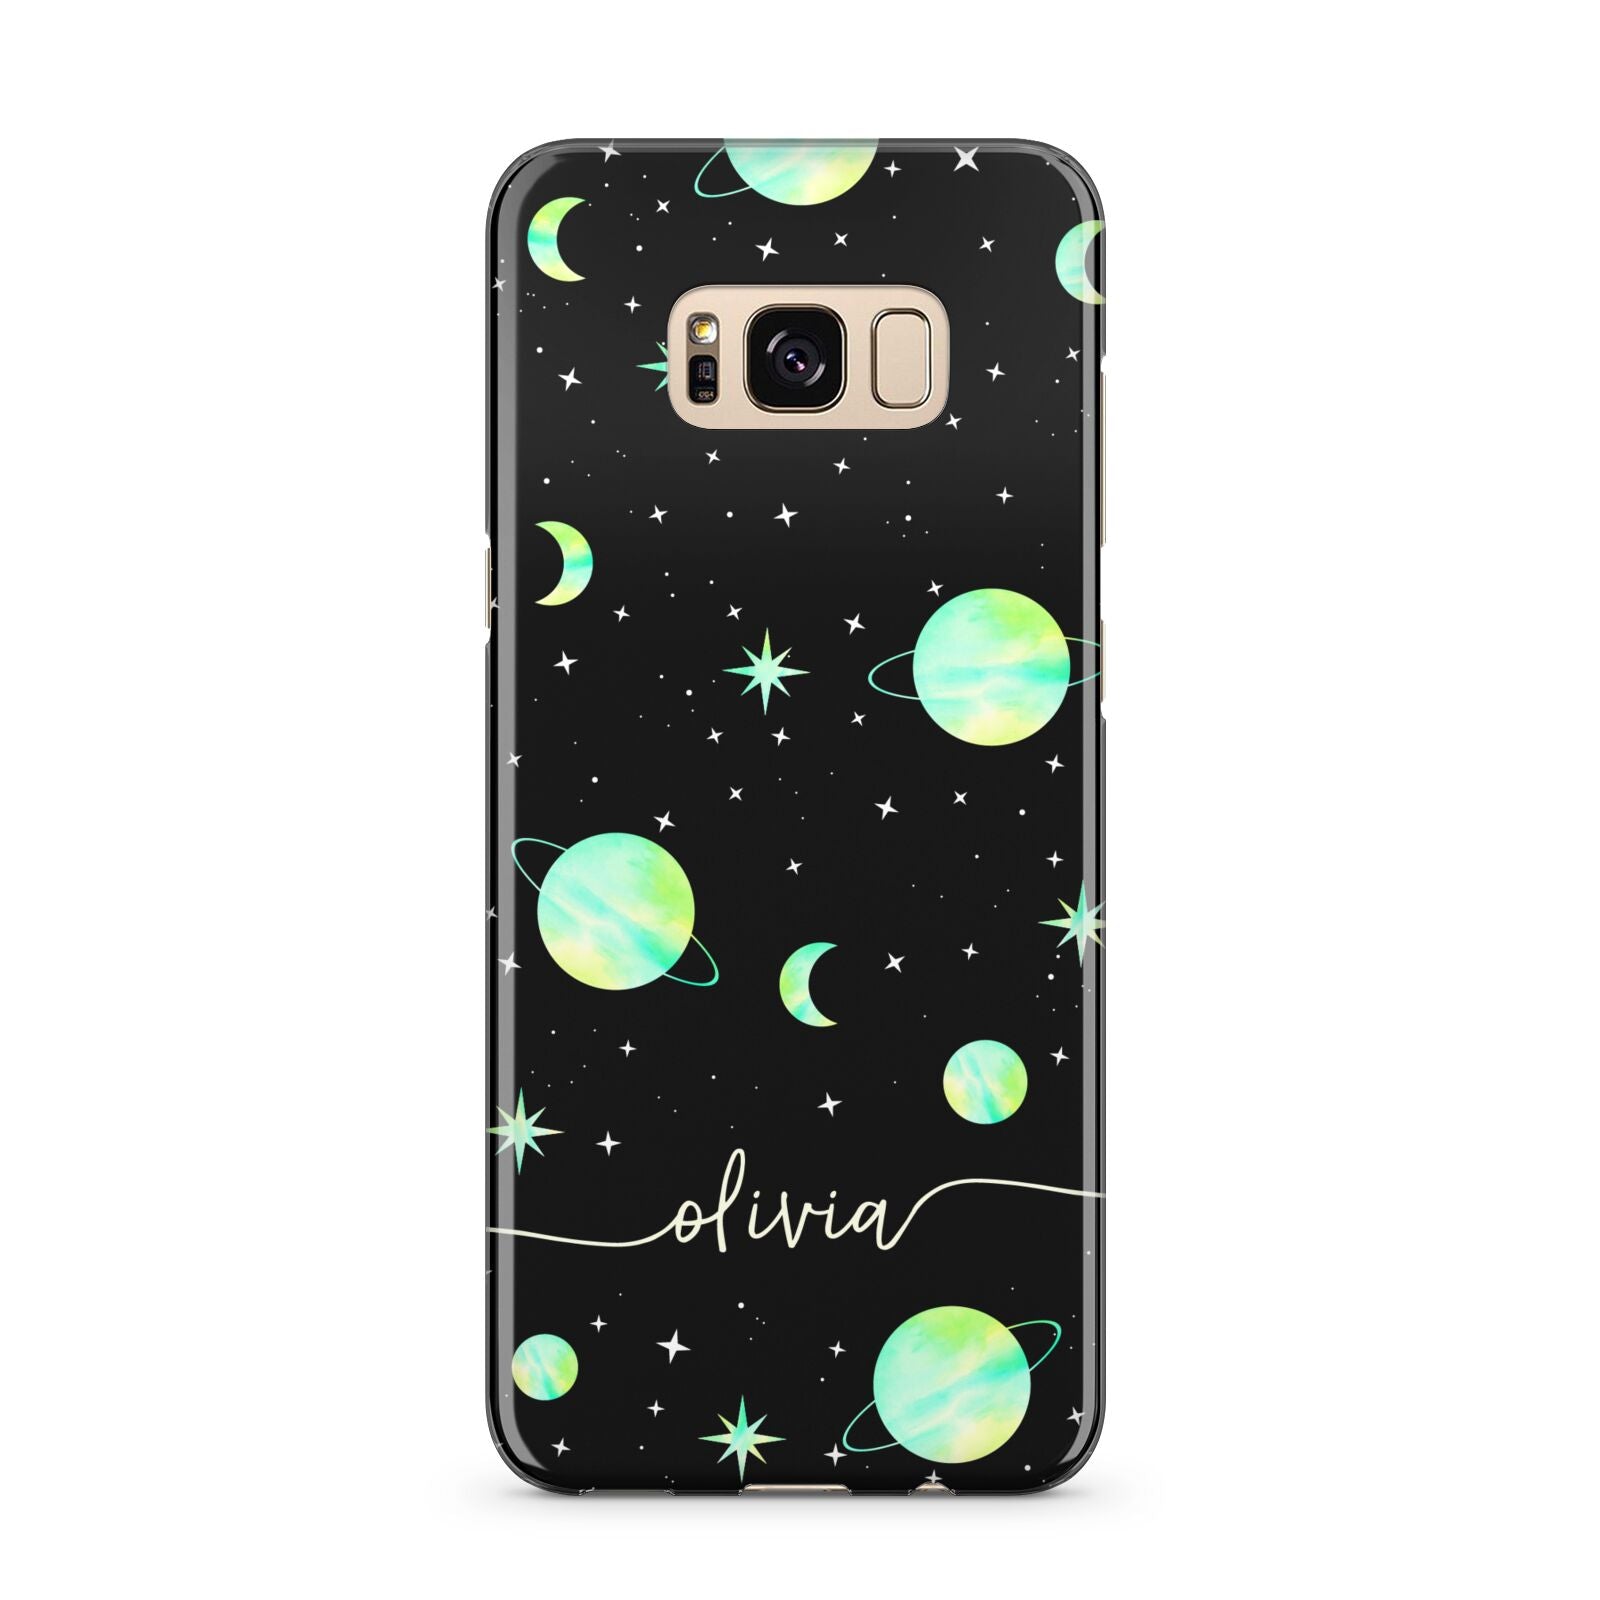 Green Galaxy Personalised Name Samsung Galaxy S8 Plus Case